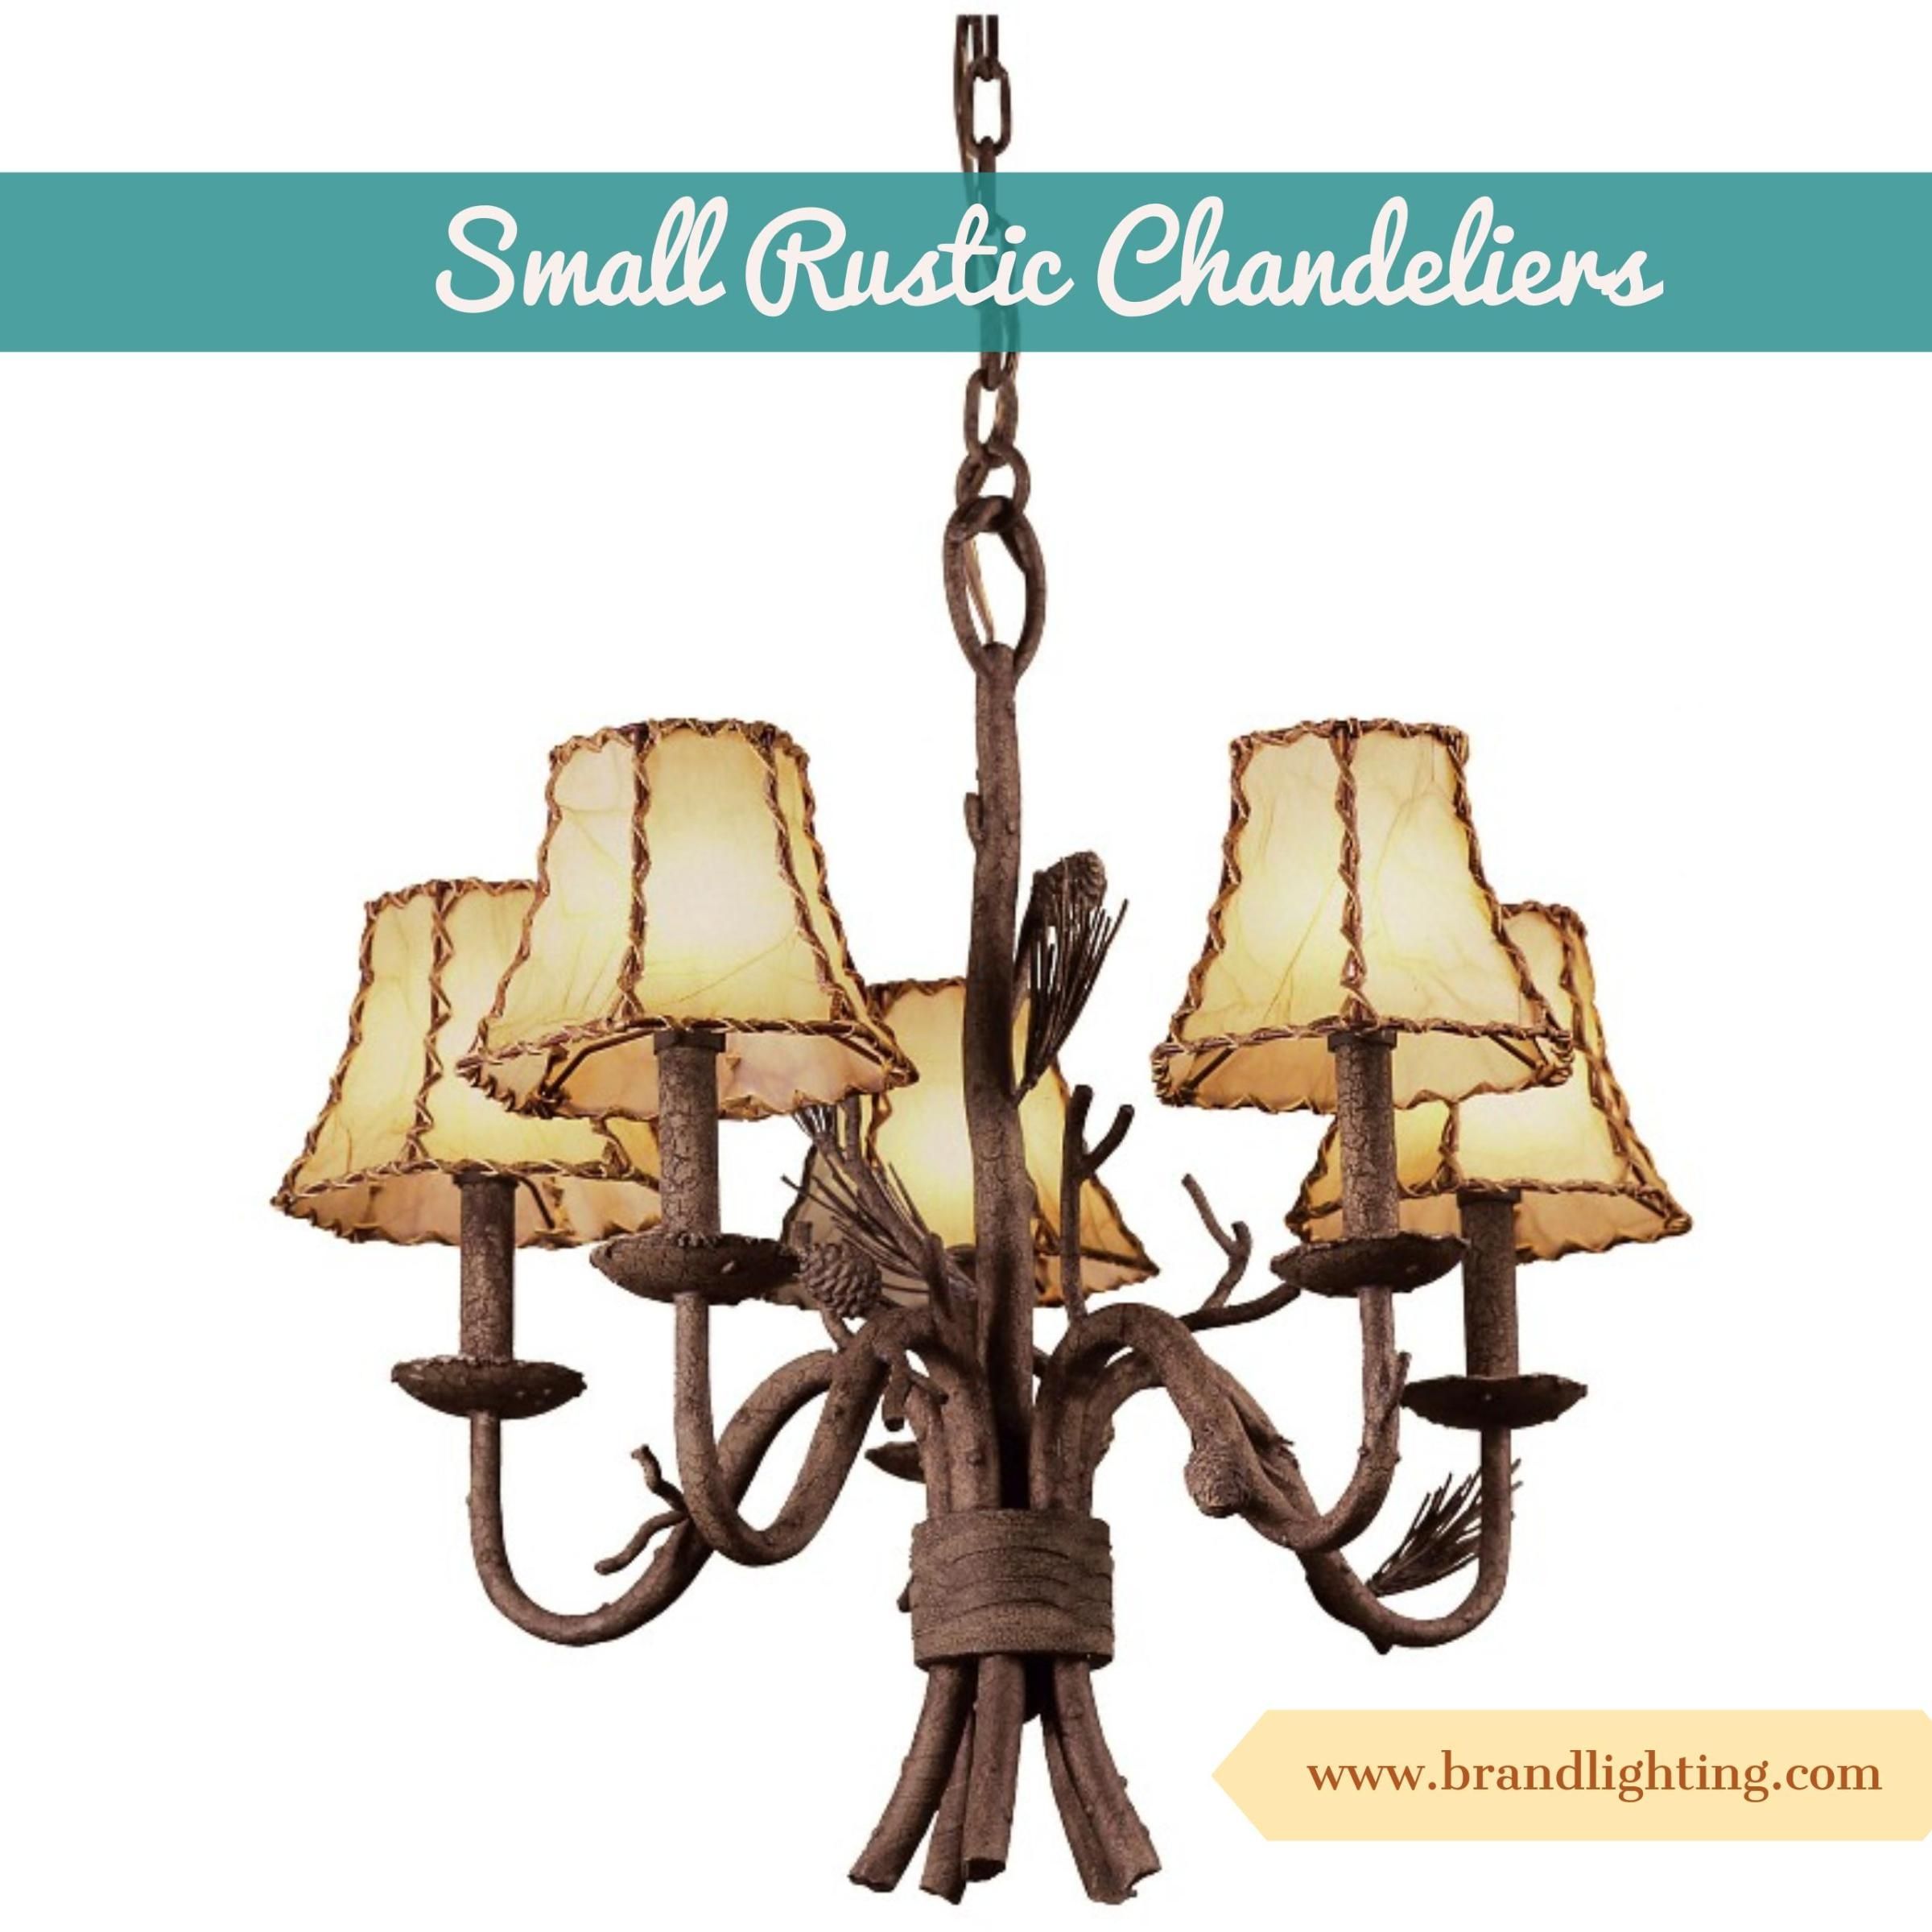 Small Rustic Chandeliers From Wwwbrandlighting Log Cabin Regarding Small Rustic Chandeliers (View 20 of 25)